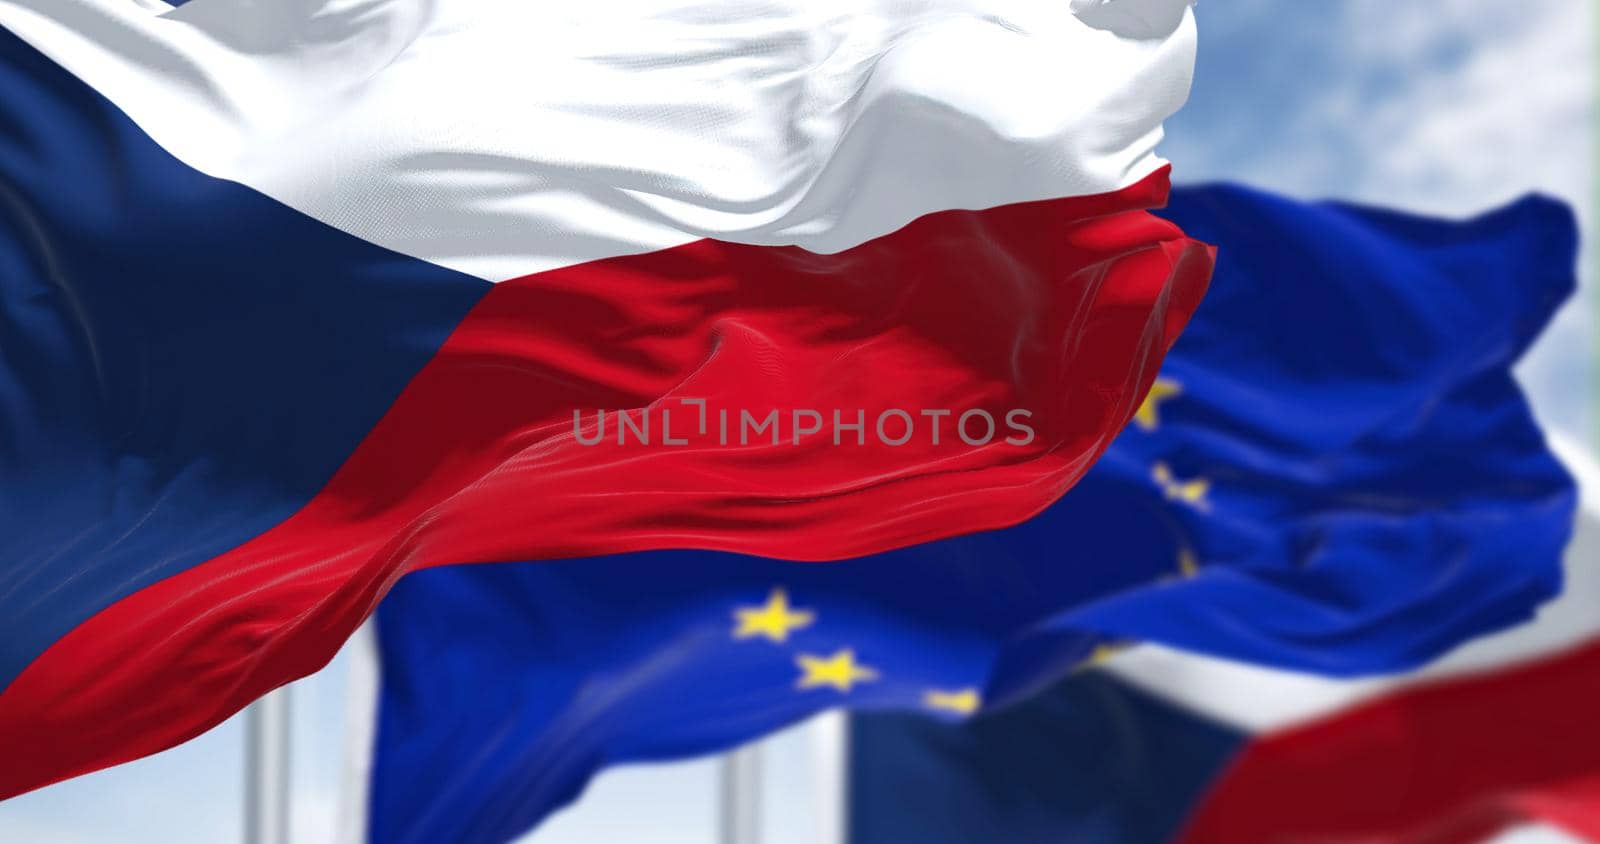 Detail of the national flag of Czech Republic waving in the wind with blurred european union flag by rarrarorro